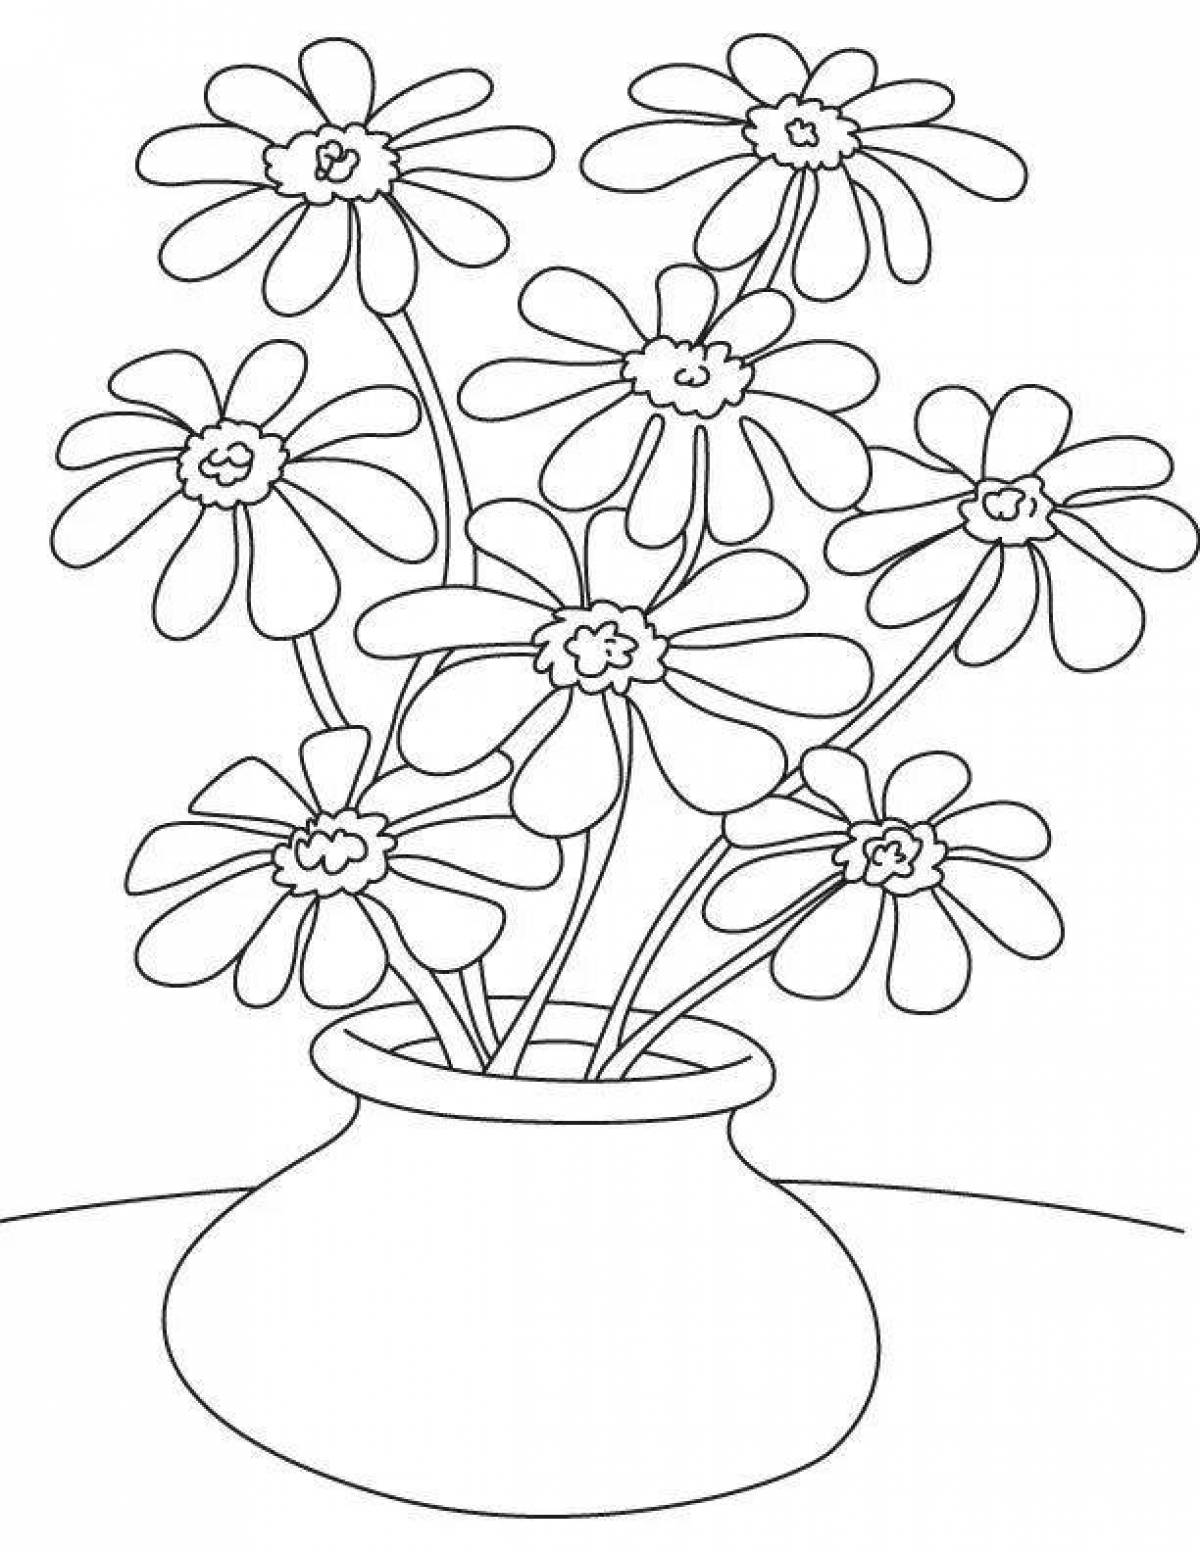 Coloring book ecstatic bouquet of daisies